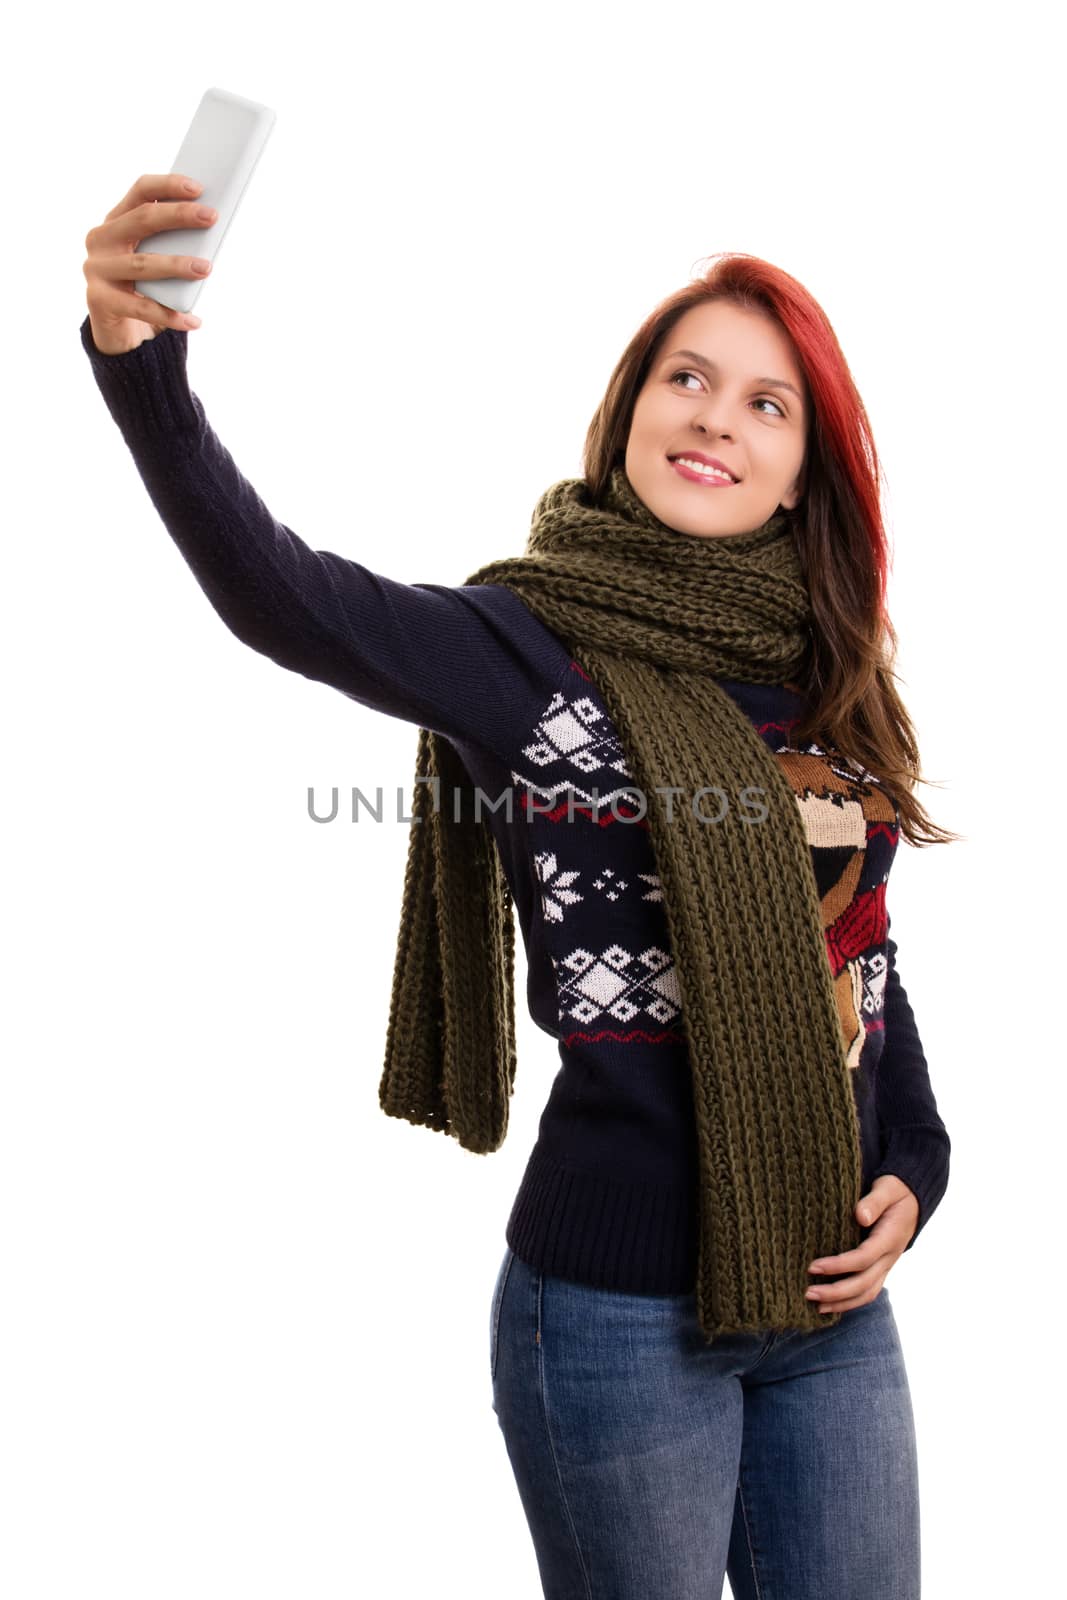 Young girl in winter clothes taking a selfie by Mendelex